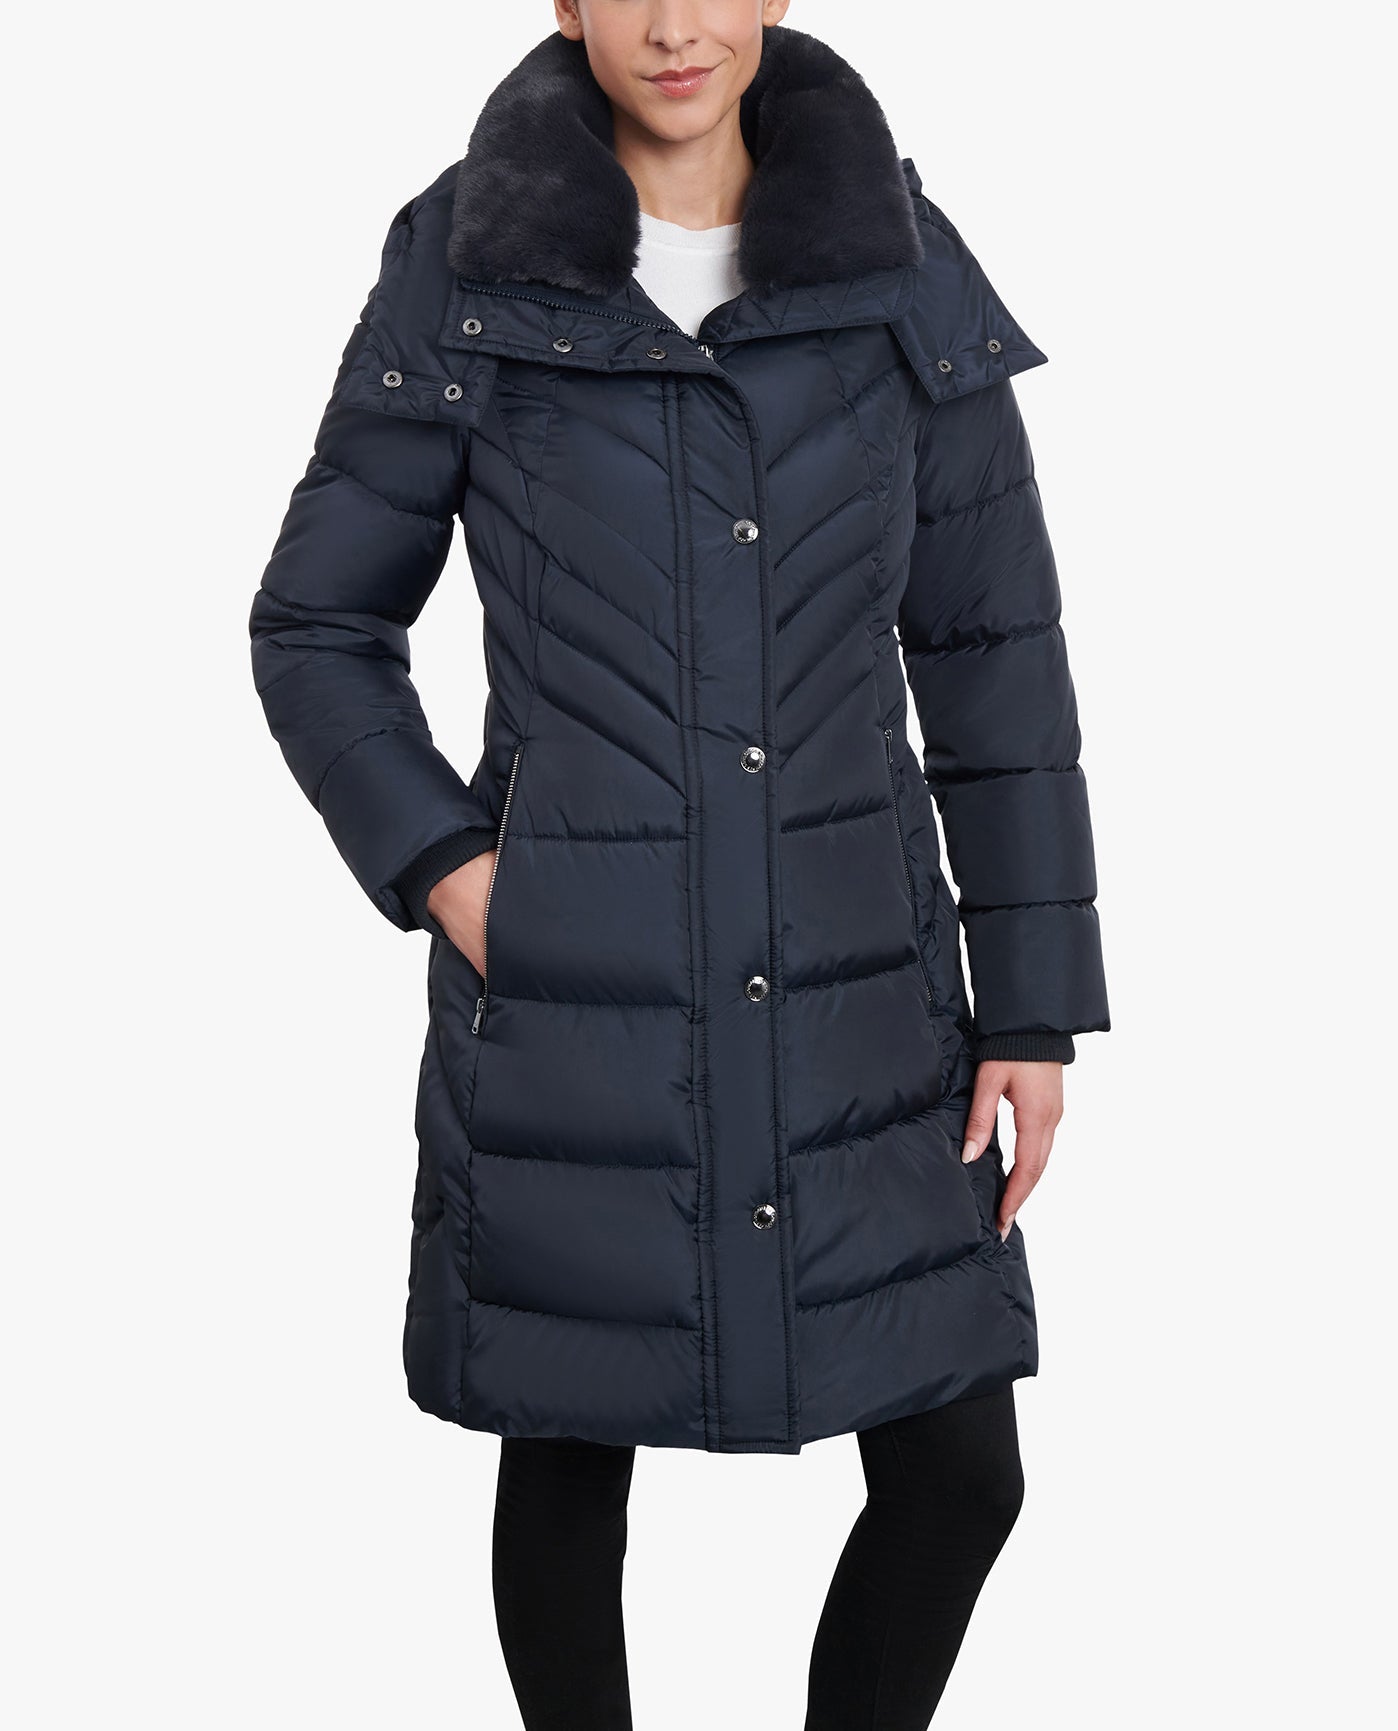 FRONT VIEW OF PLUS SIZE ZIP-FRONT HOODED HEAVY WEIGHT PUFFER JACKET WITH BUTTON-OFF FUR COLLAR | NAVY